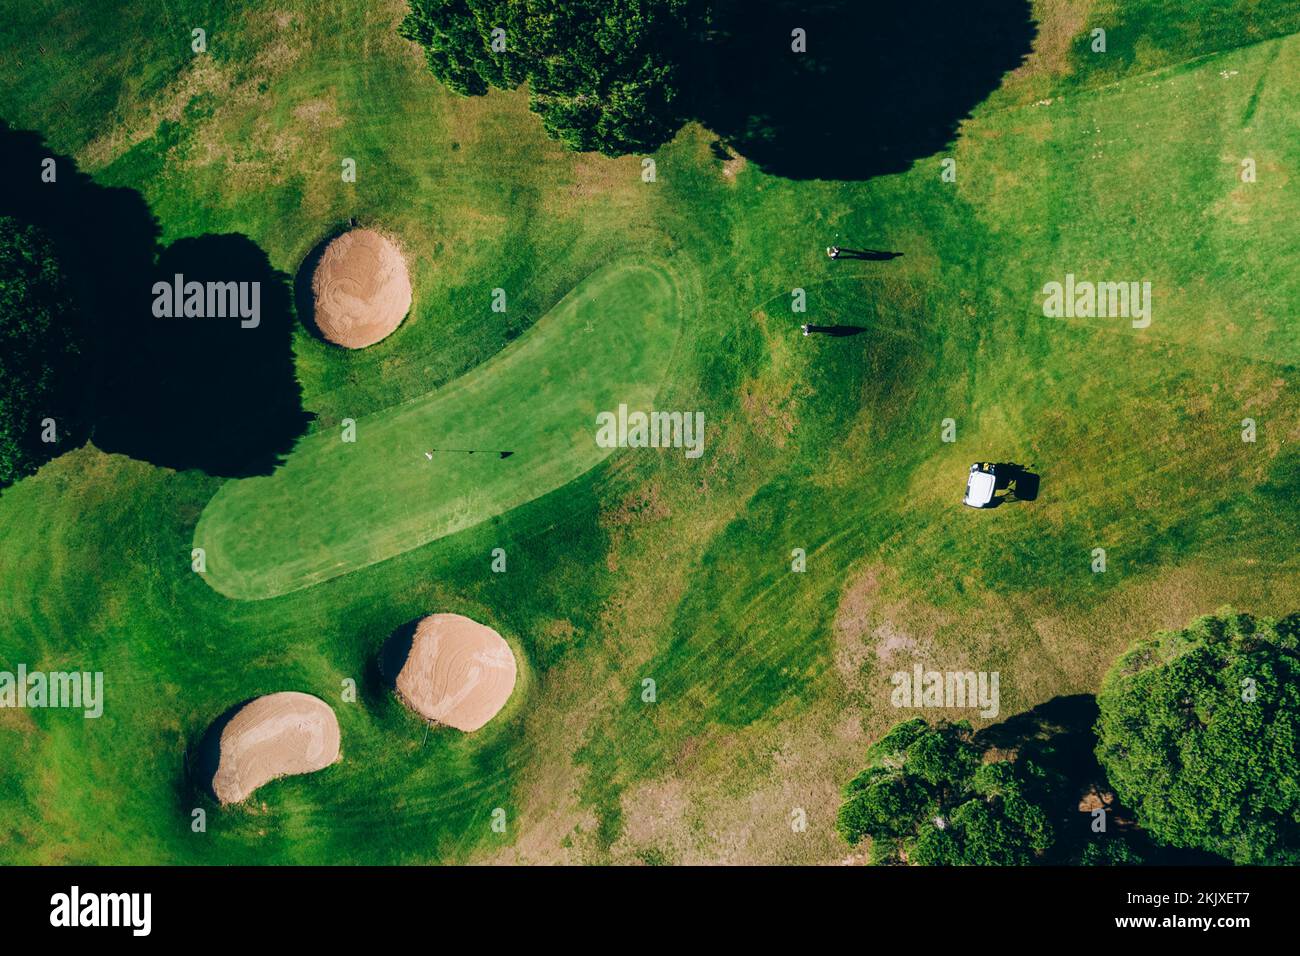 Top down aerial view of greenery golf court in the Algarve, Portugal Stock Photo